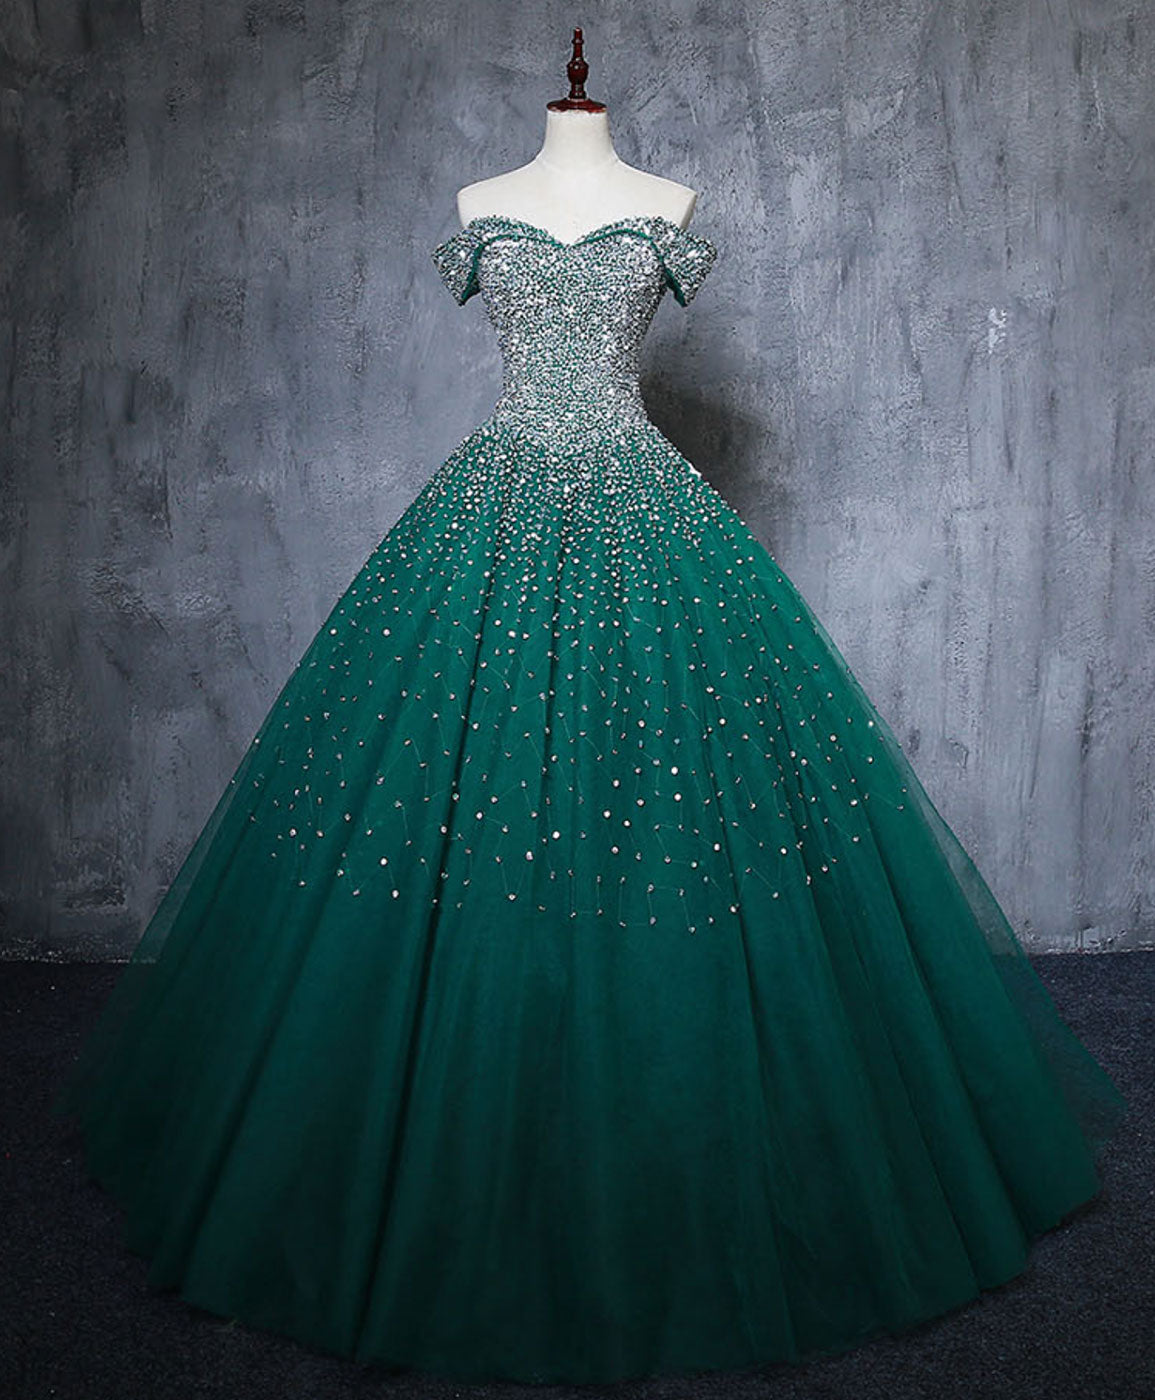 Green Tulle Sequin Long Corset Prom Gown, Green Sequin Sweet 16 Dress outfit, Prom Dress Brands